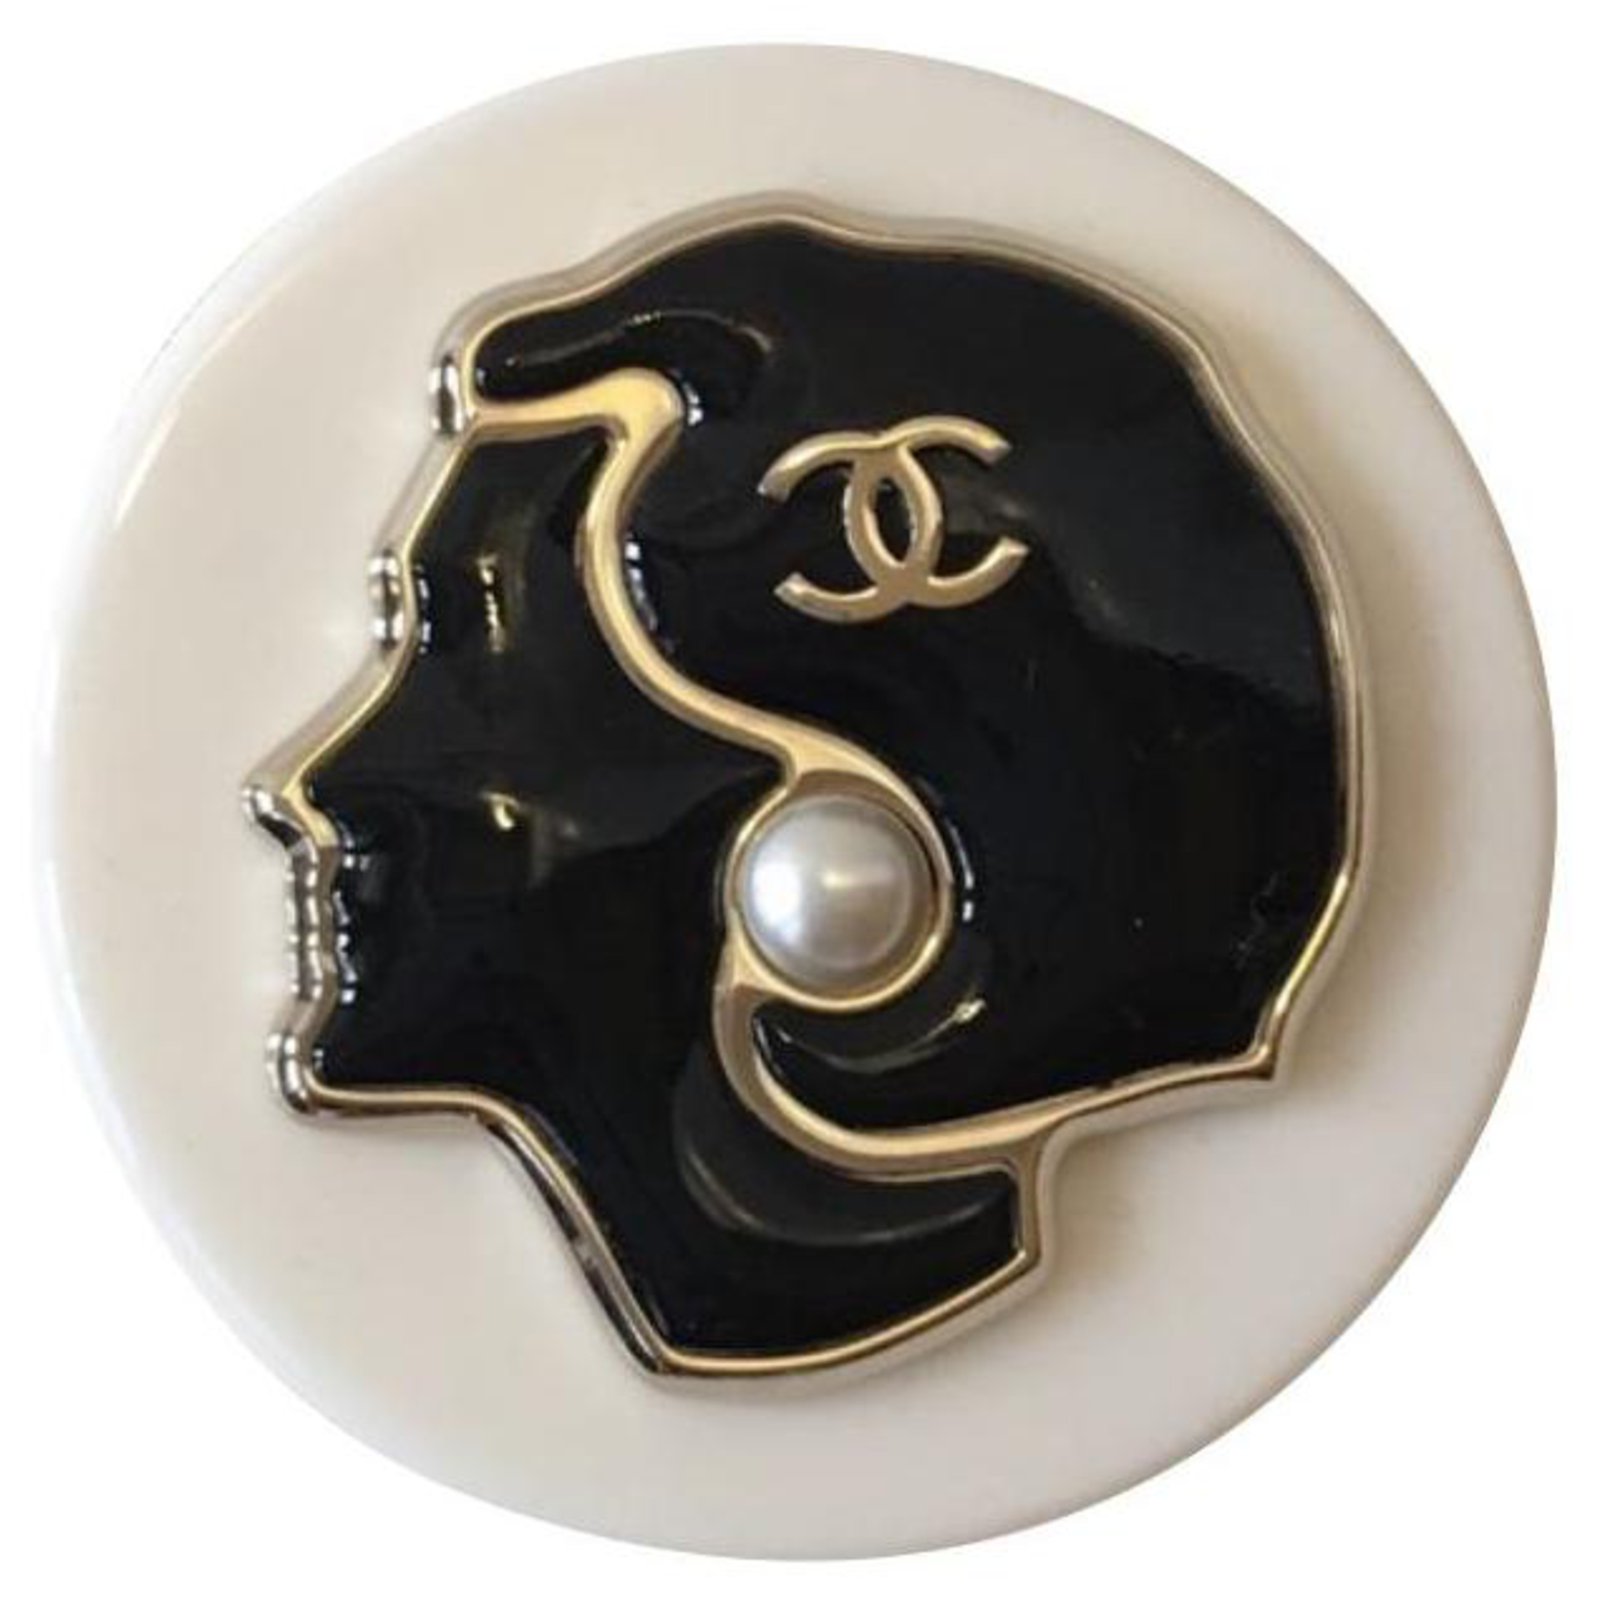 CHANEL Pin Brooch Madame Coco Chanel with pearl In Box